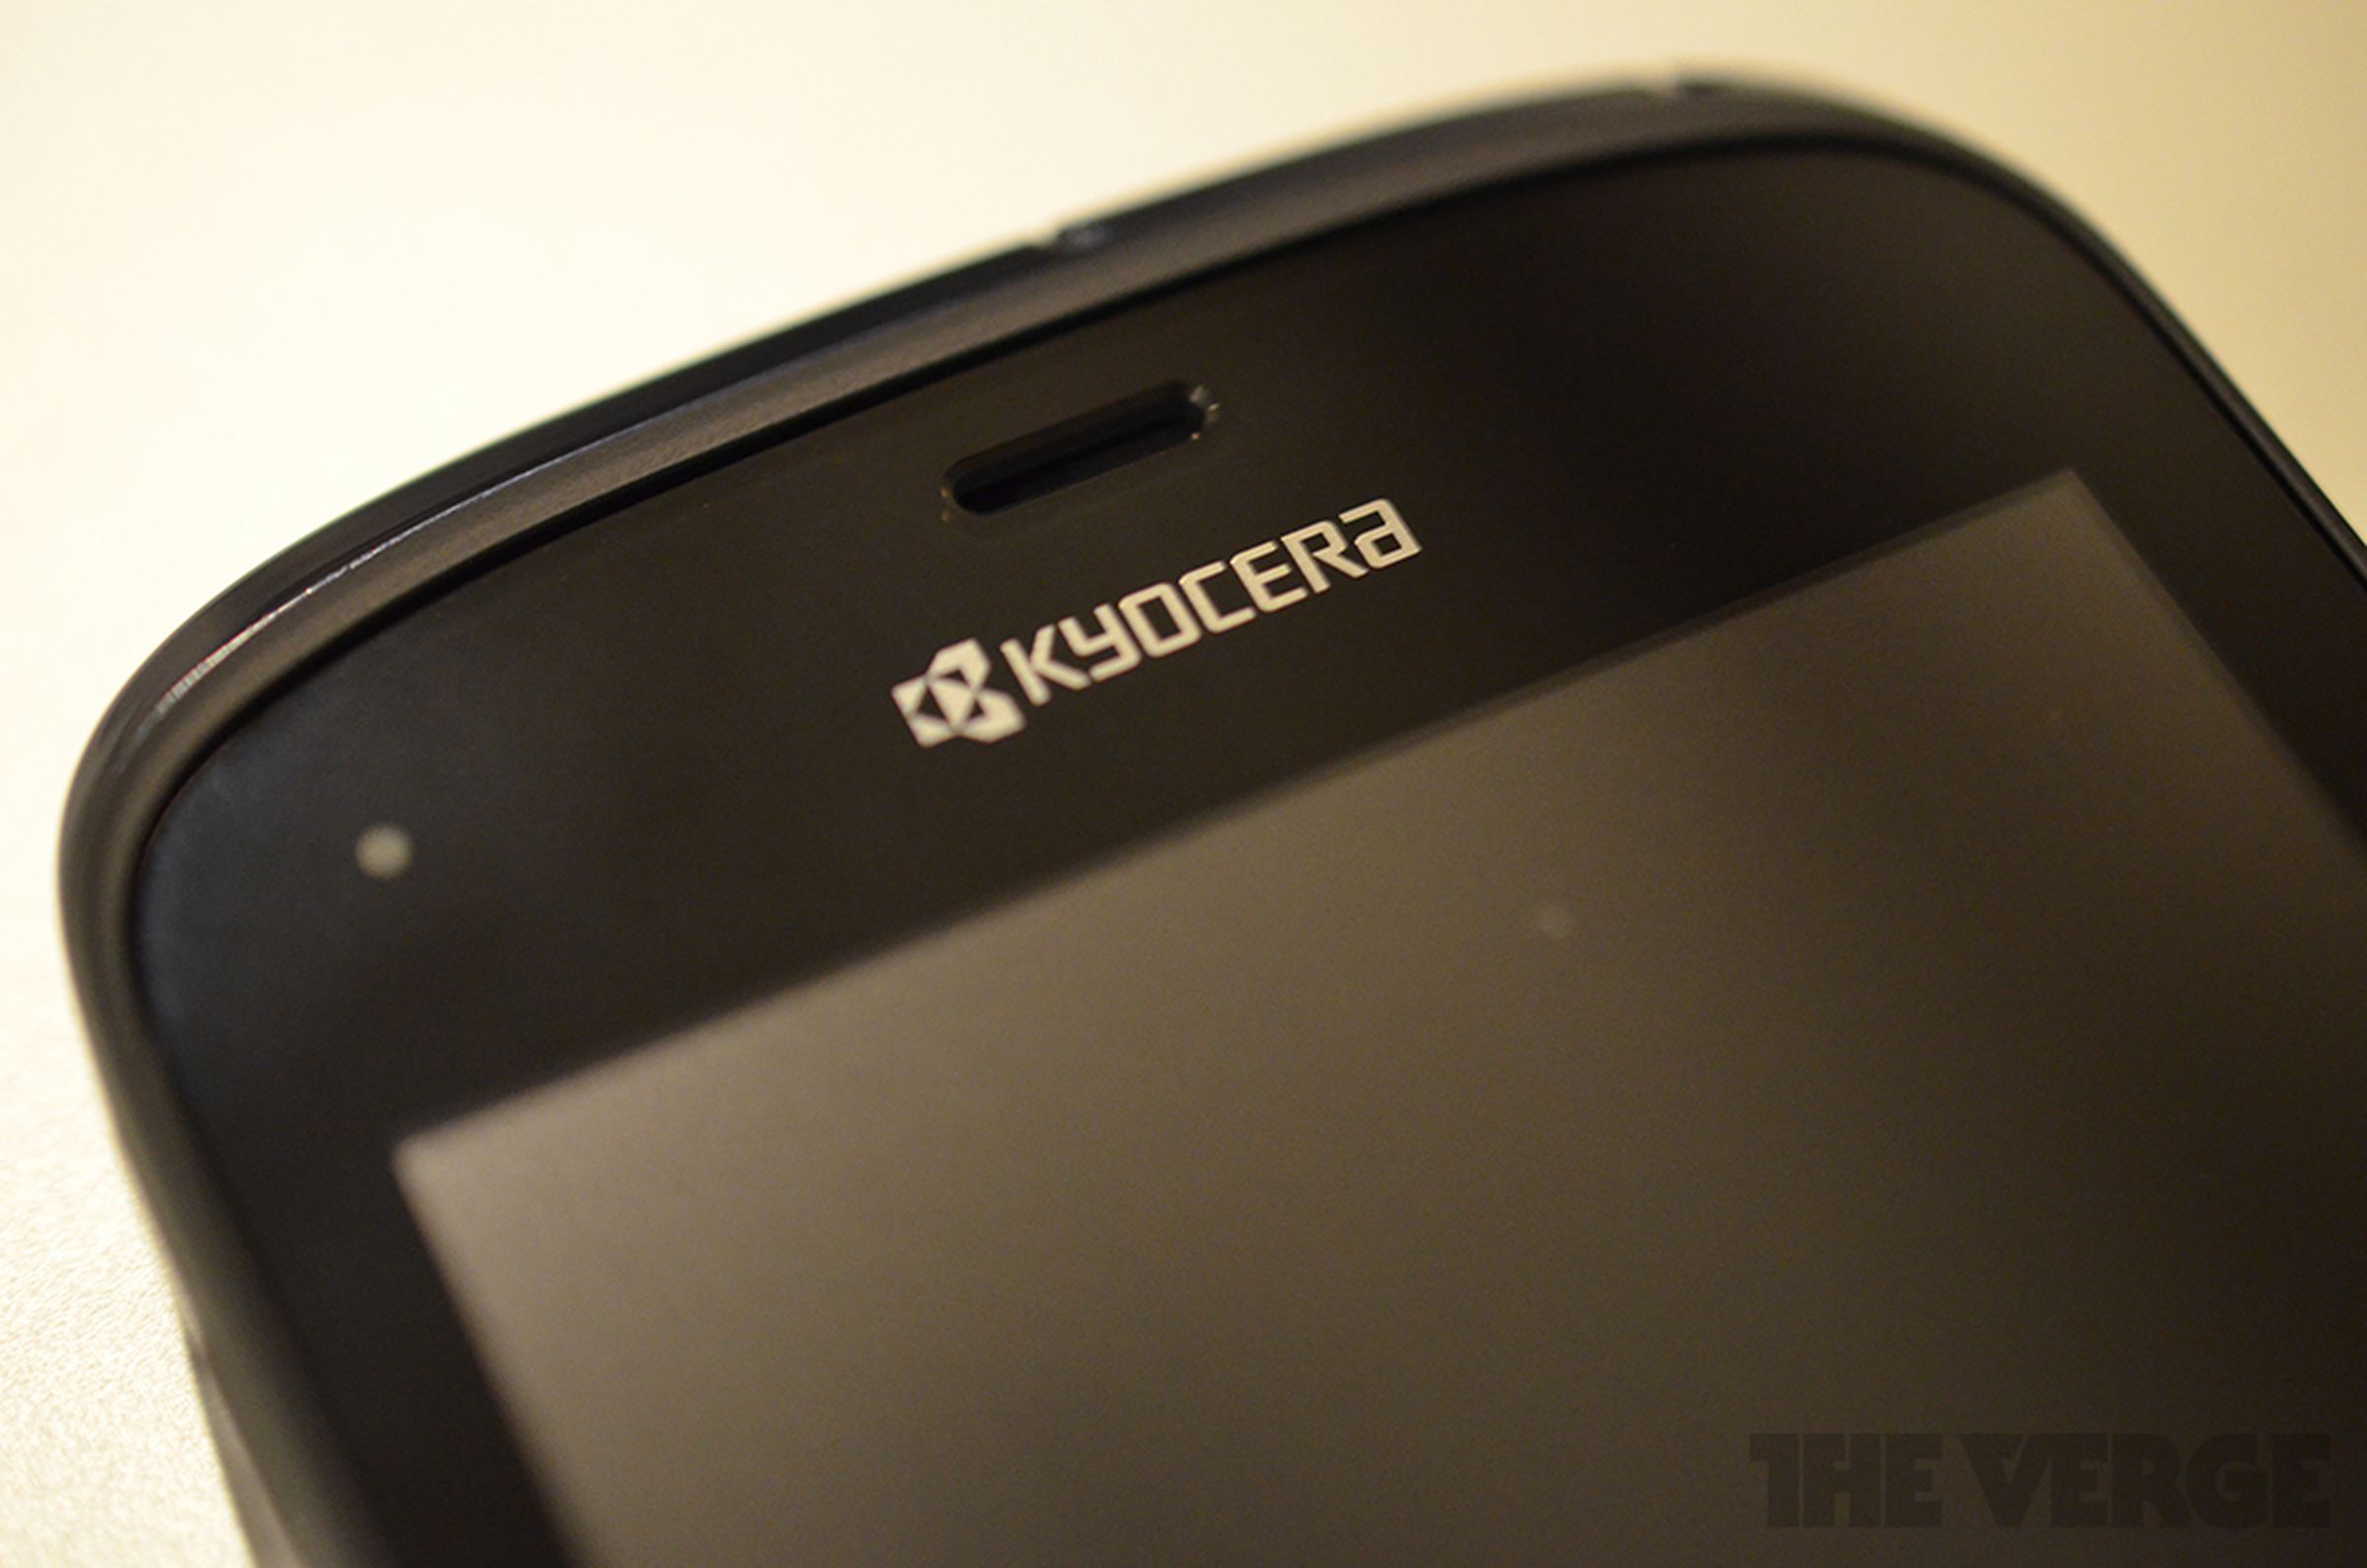 Kyocera Rise and Hydro hands-on pictures